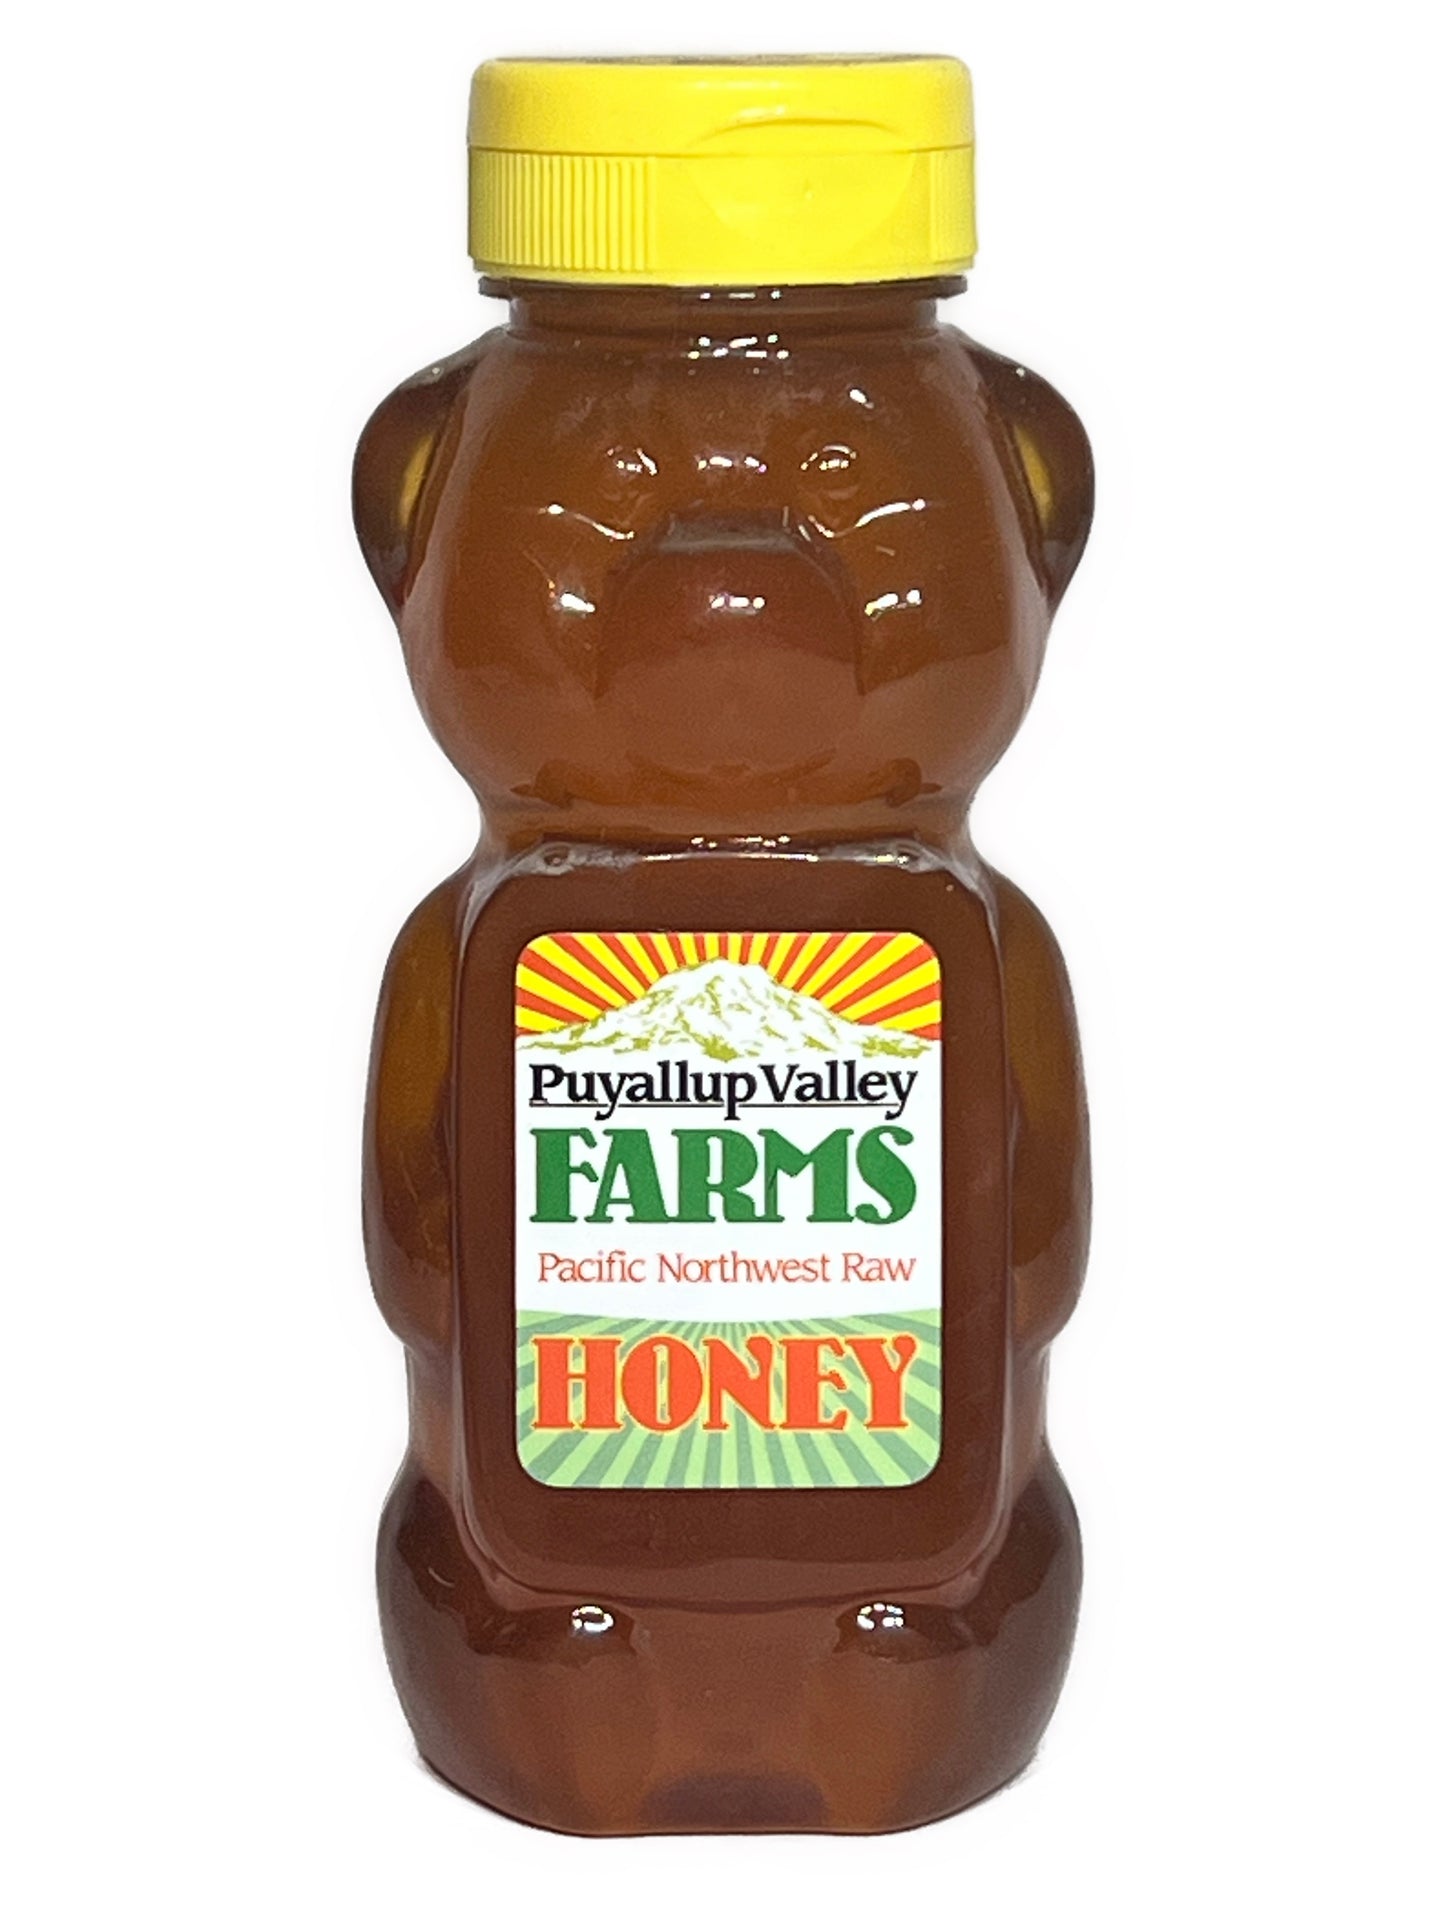 Orange Blossom Raw Honey by Puyallup Valley Farms Organic Unfiltered Raw Honey All Natural Sweetener No Additives Non Pasteurized Organic Raw Honey BPA Free Raw Organic Honey Bear Squeeze Bottle No Drip Cap FREE SHIPPING Orange Blossom 12 Oz.